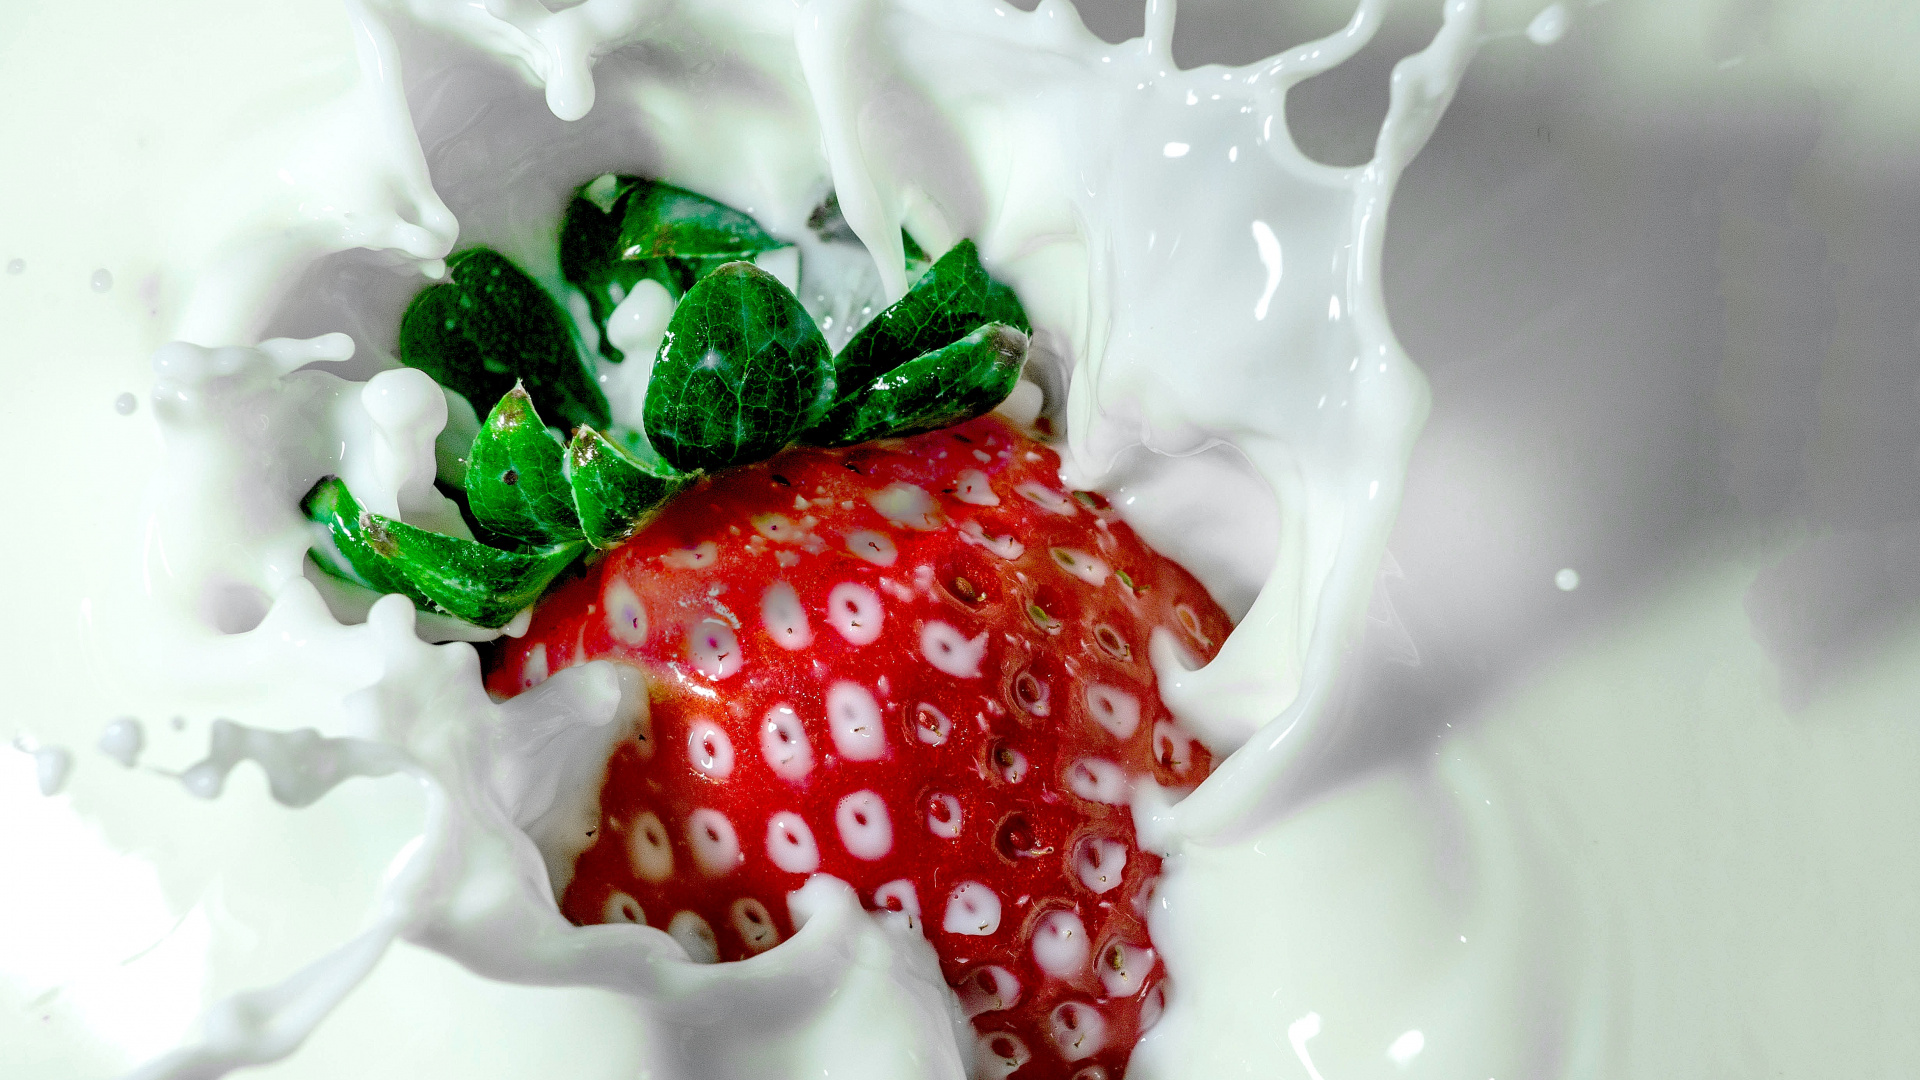 Strawberry on White Ceramic Plate. Wallpaper in 1920x1080 Resolution